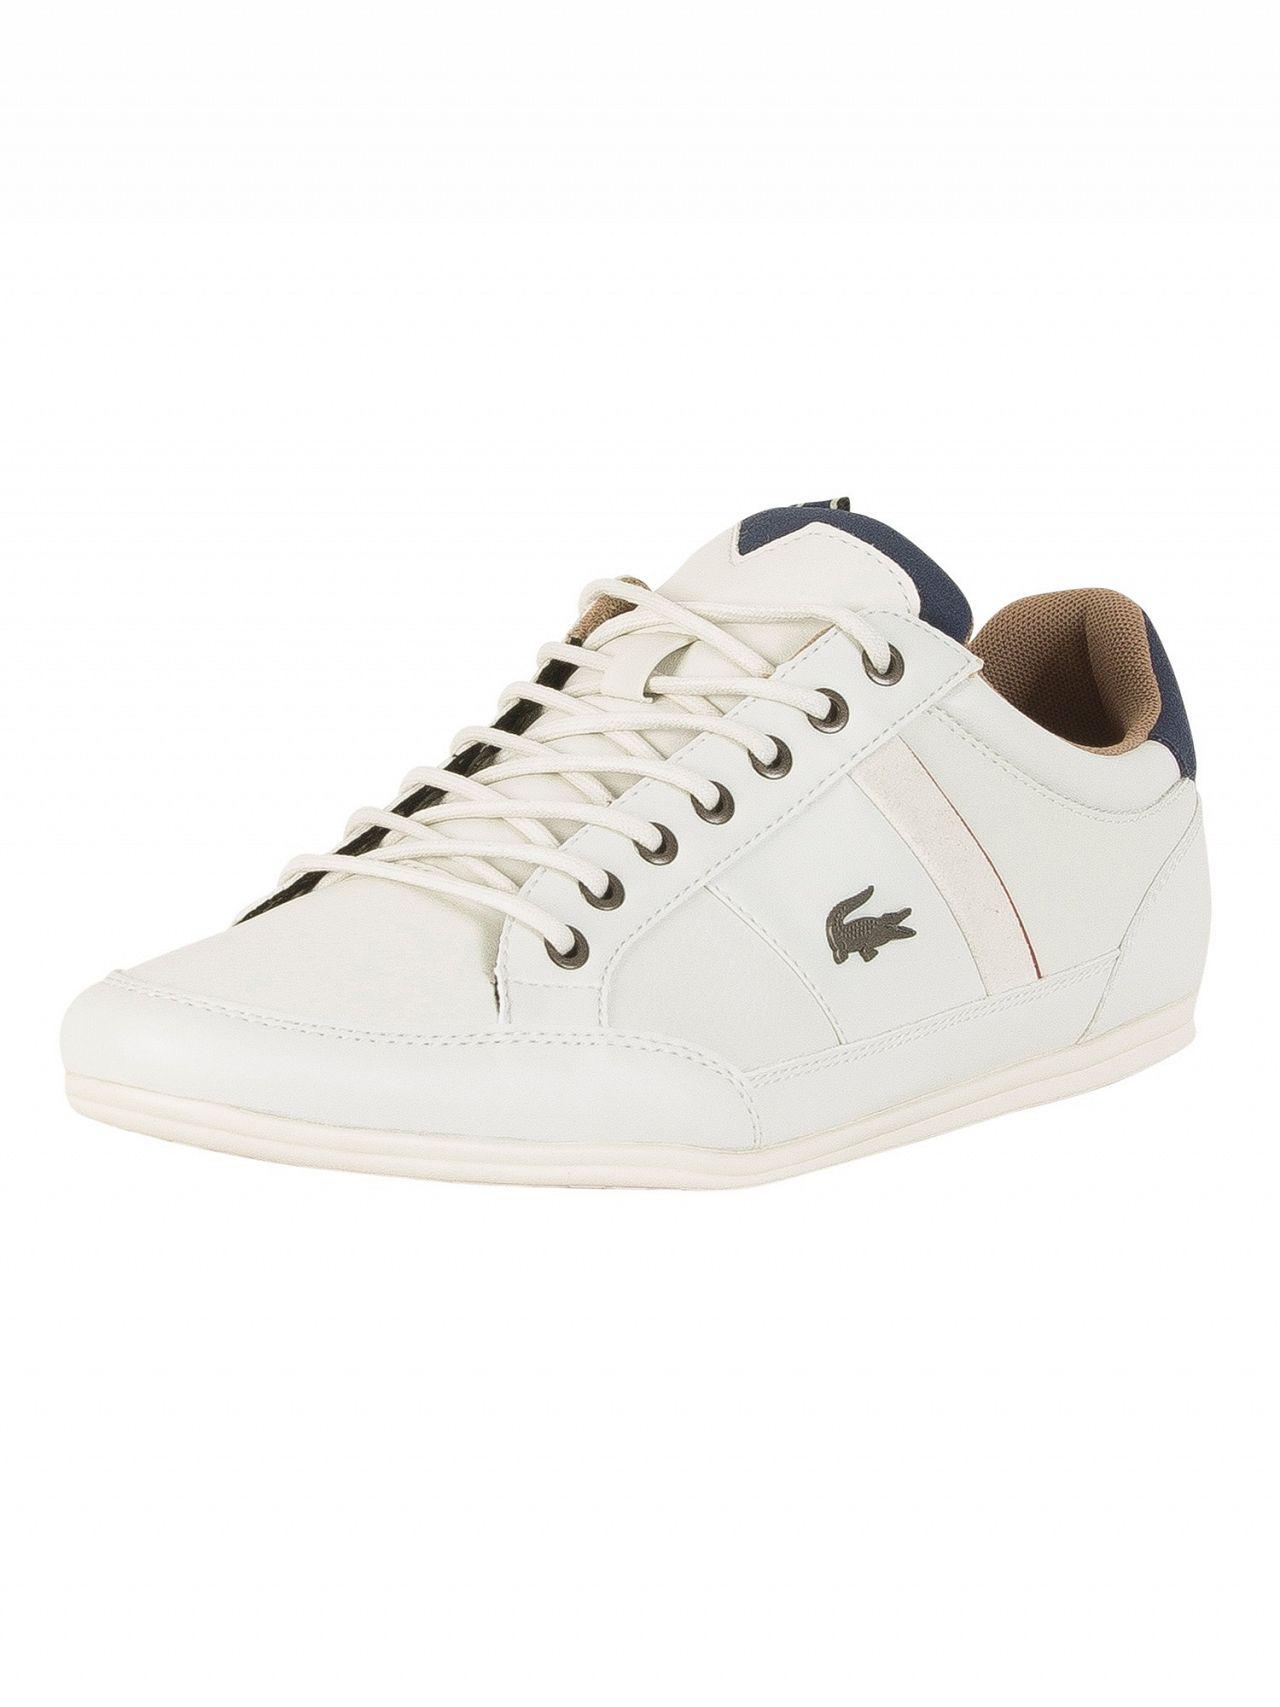 Lacoste Off White/navy Chaymon 118 2 Cam Leather Trainers for Men - Lyst